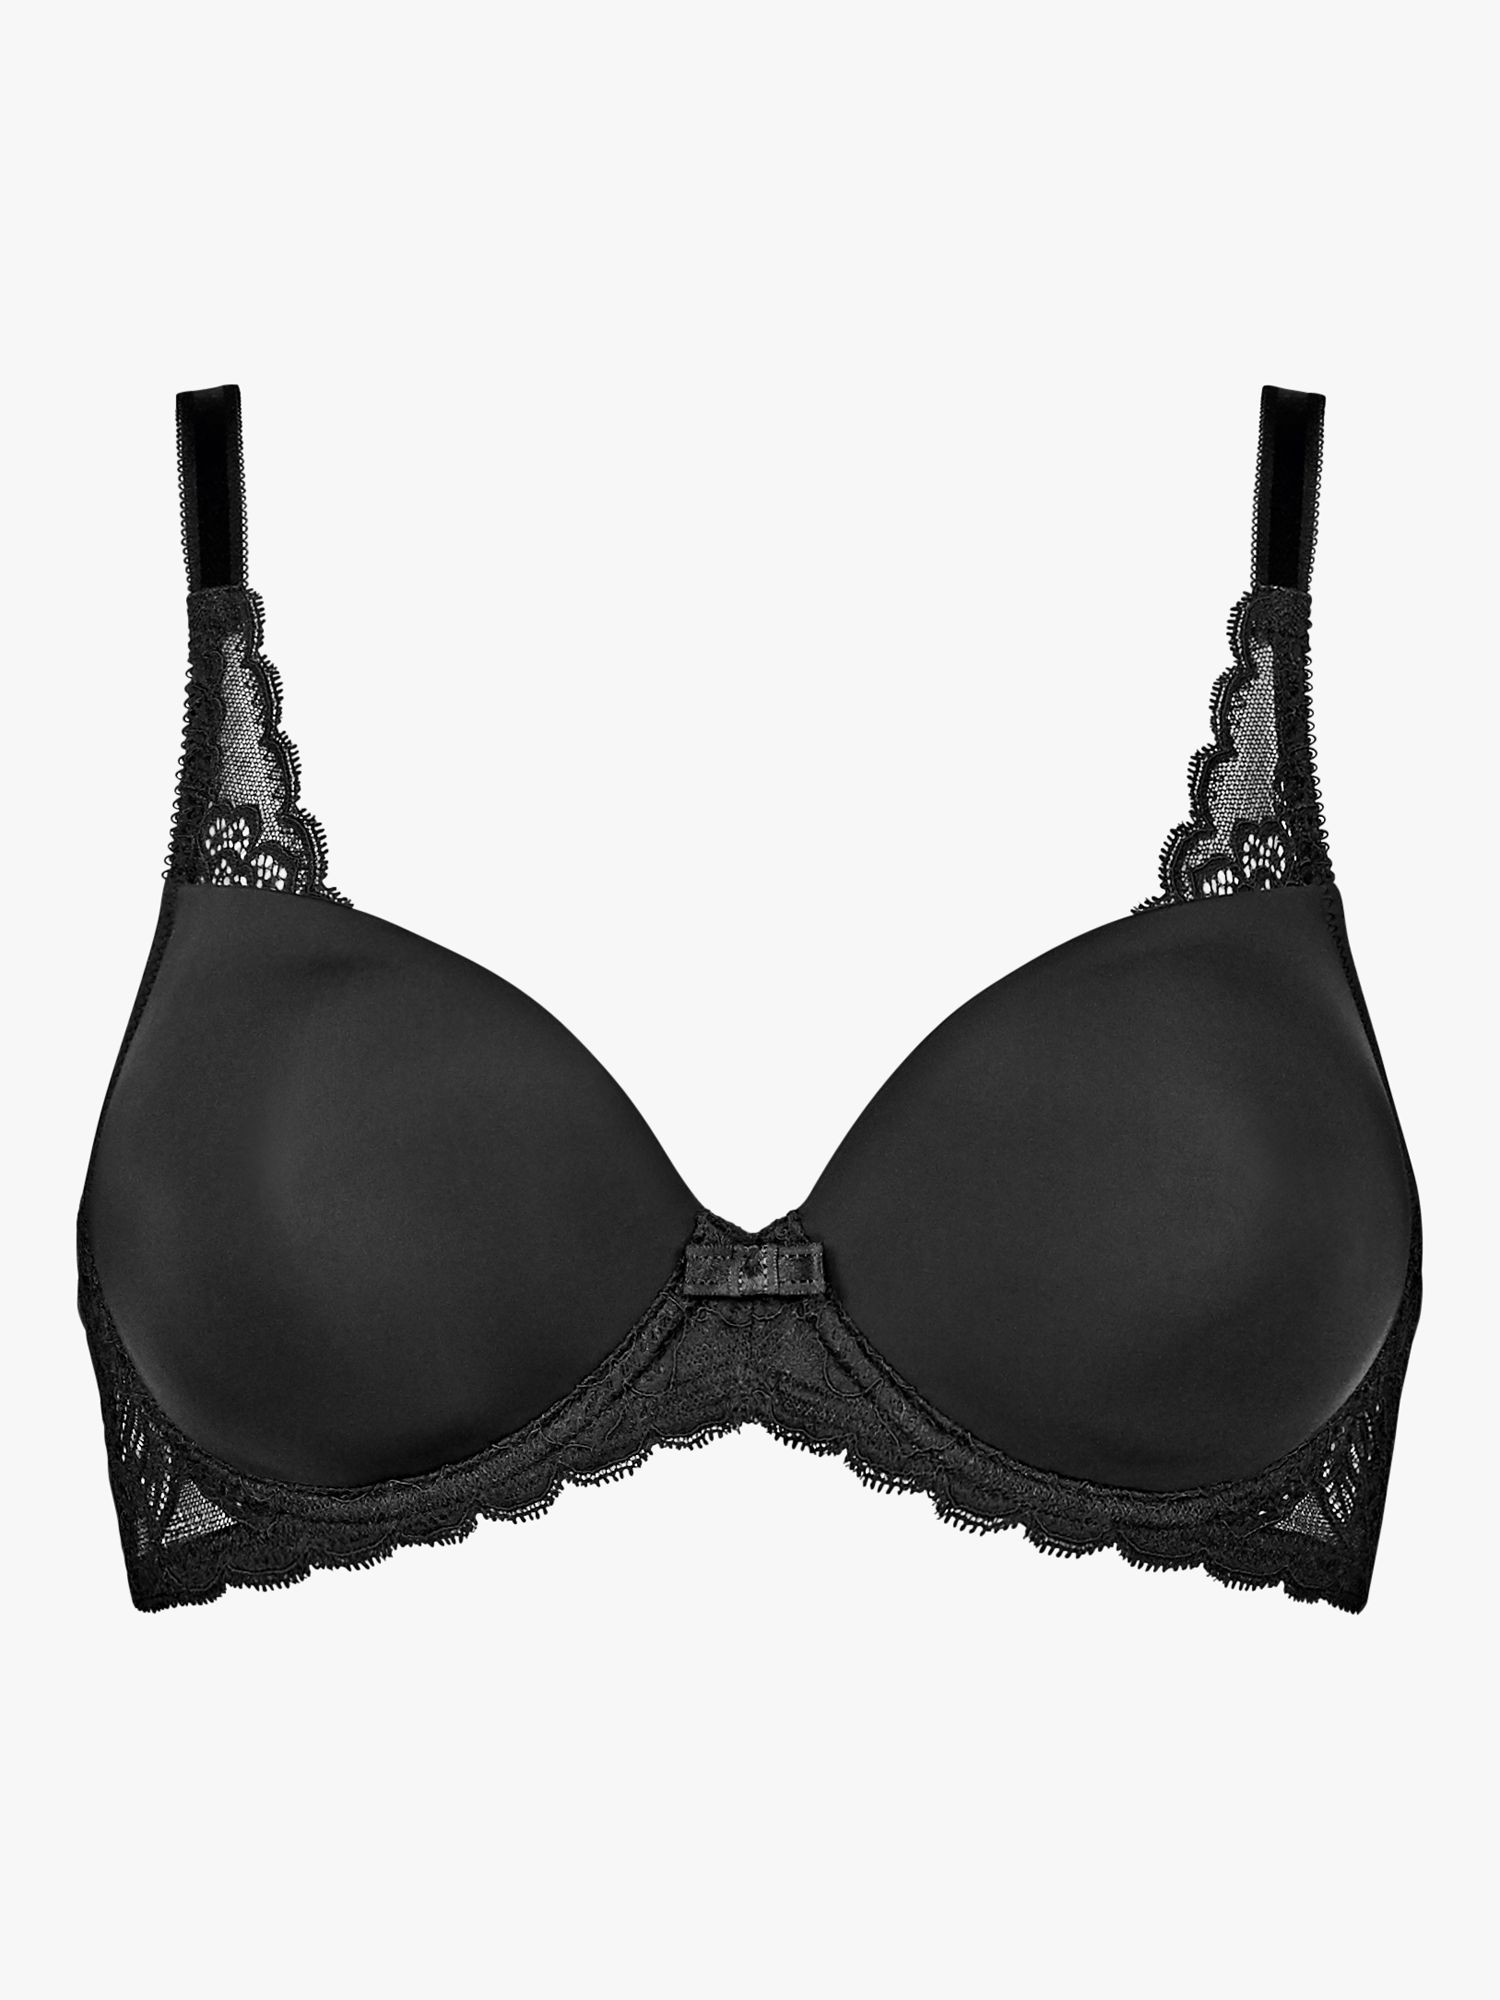 Triumph - Ramp up your confidence with sensual lace. Shop our Amourette Spotlight  bra for a heart-stopping look.